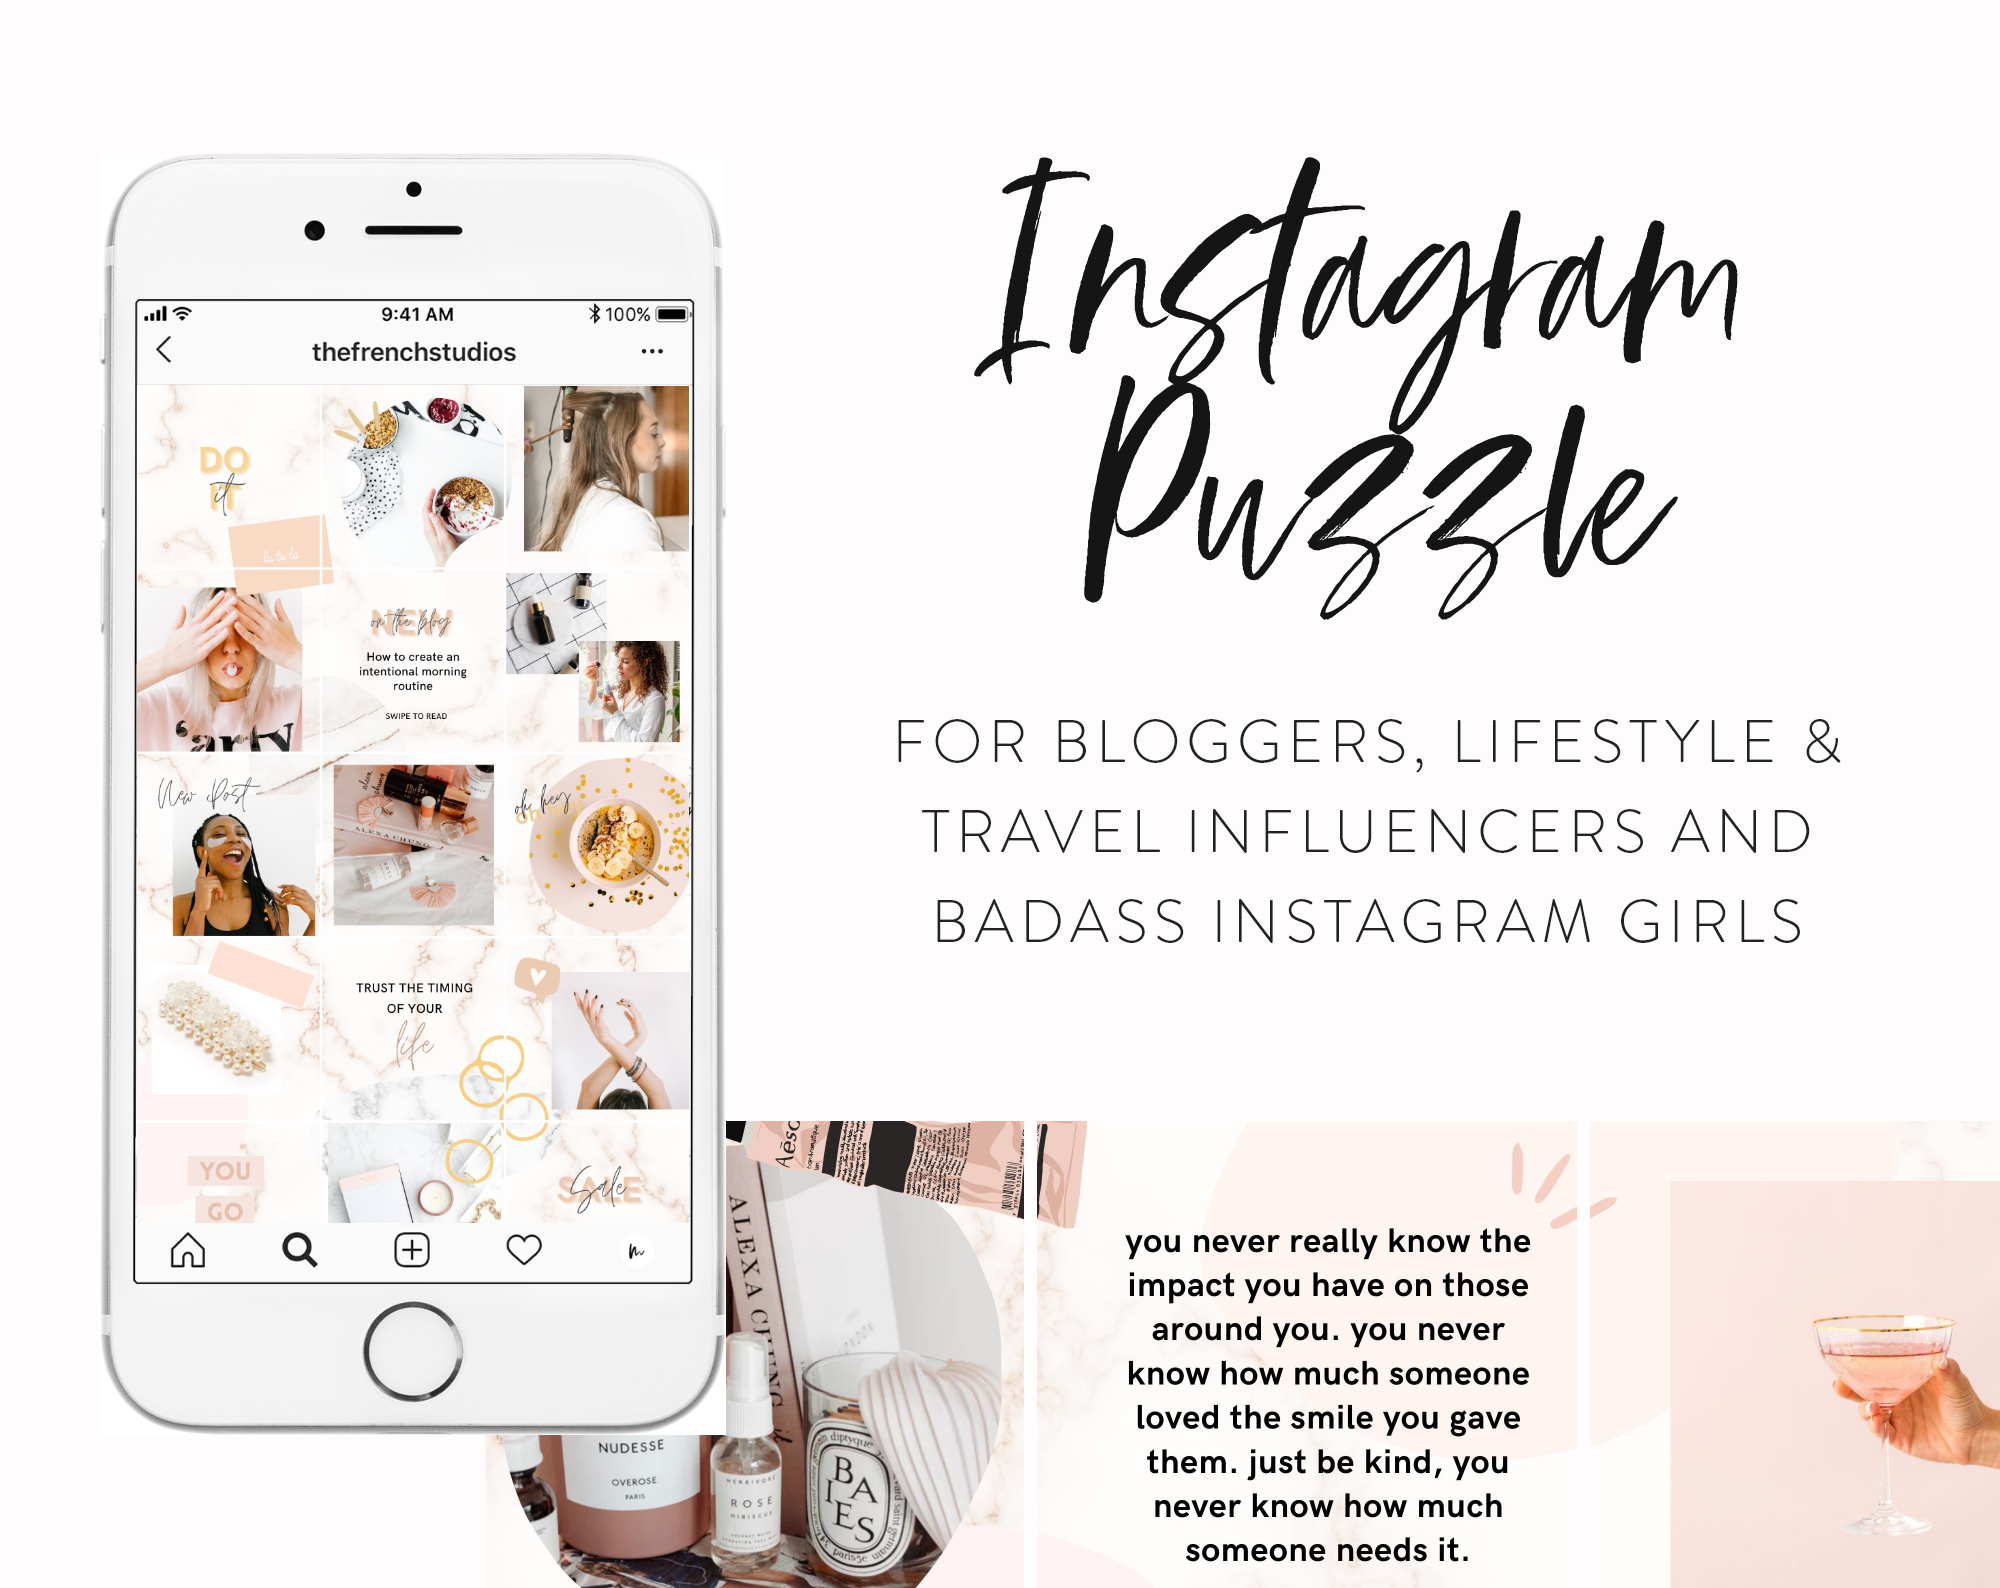 marble-Instagram-puzzle-for-canva-templates-puzzle-feed-2